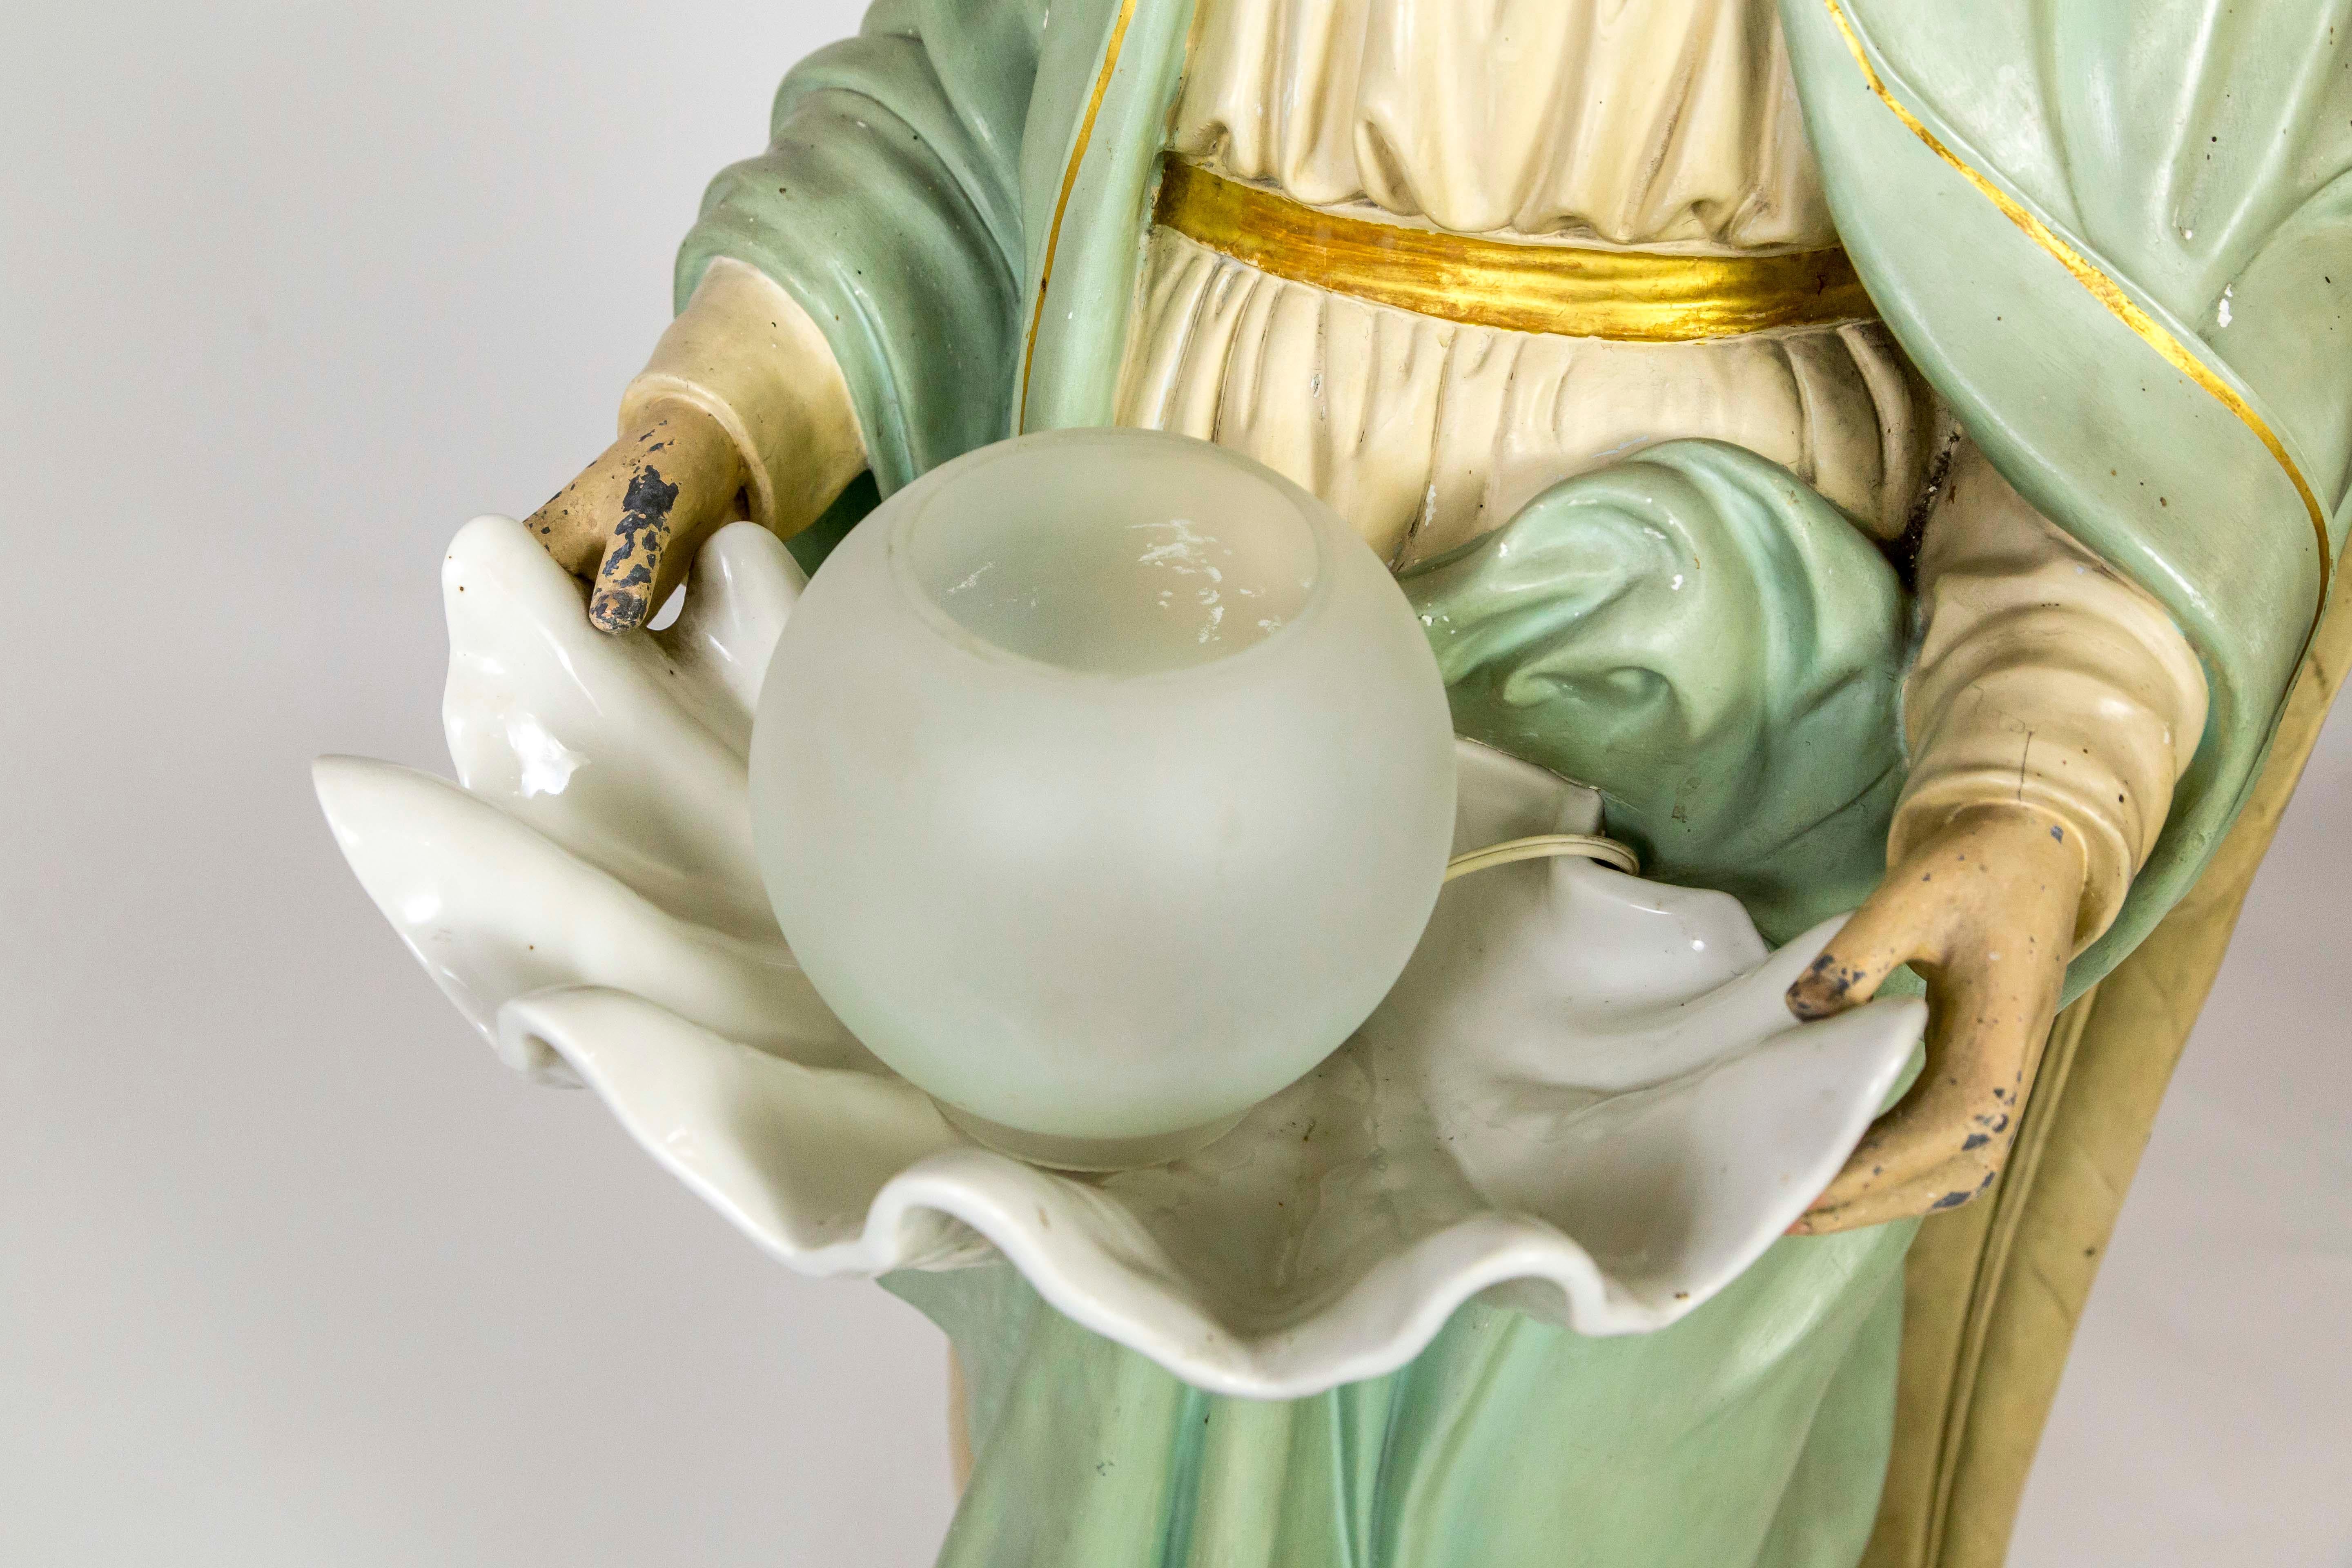 Life-size Angel Statue Holding Porcelain Clam Shell Bowl with Light 6